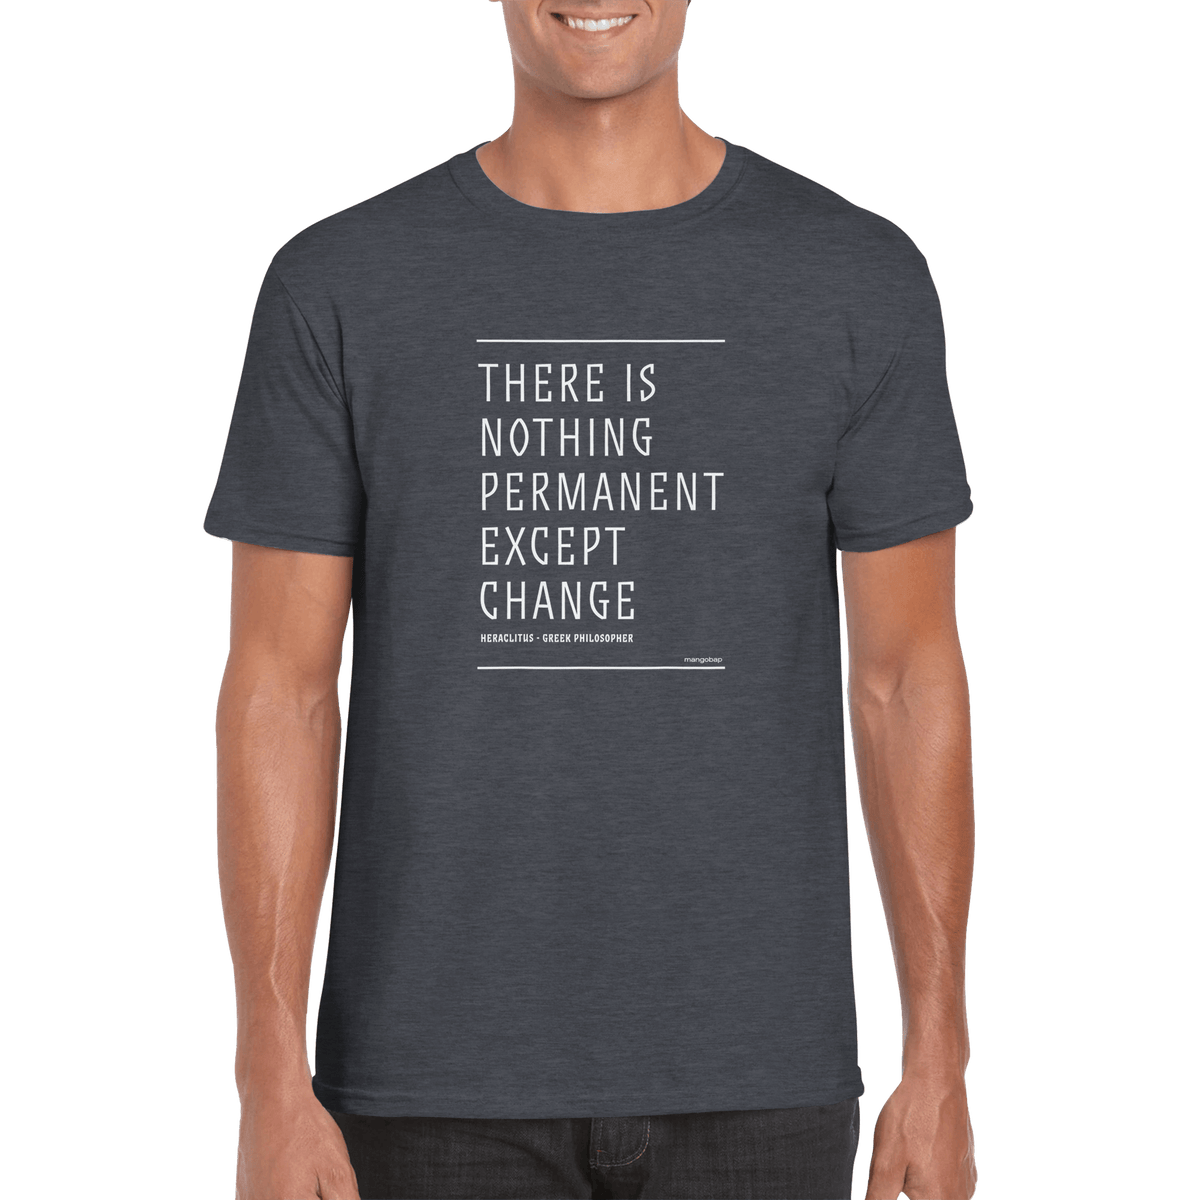 Mens There Is Nothing Permanent Except Change dark heather t shirt - MangoBap 